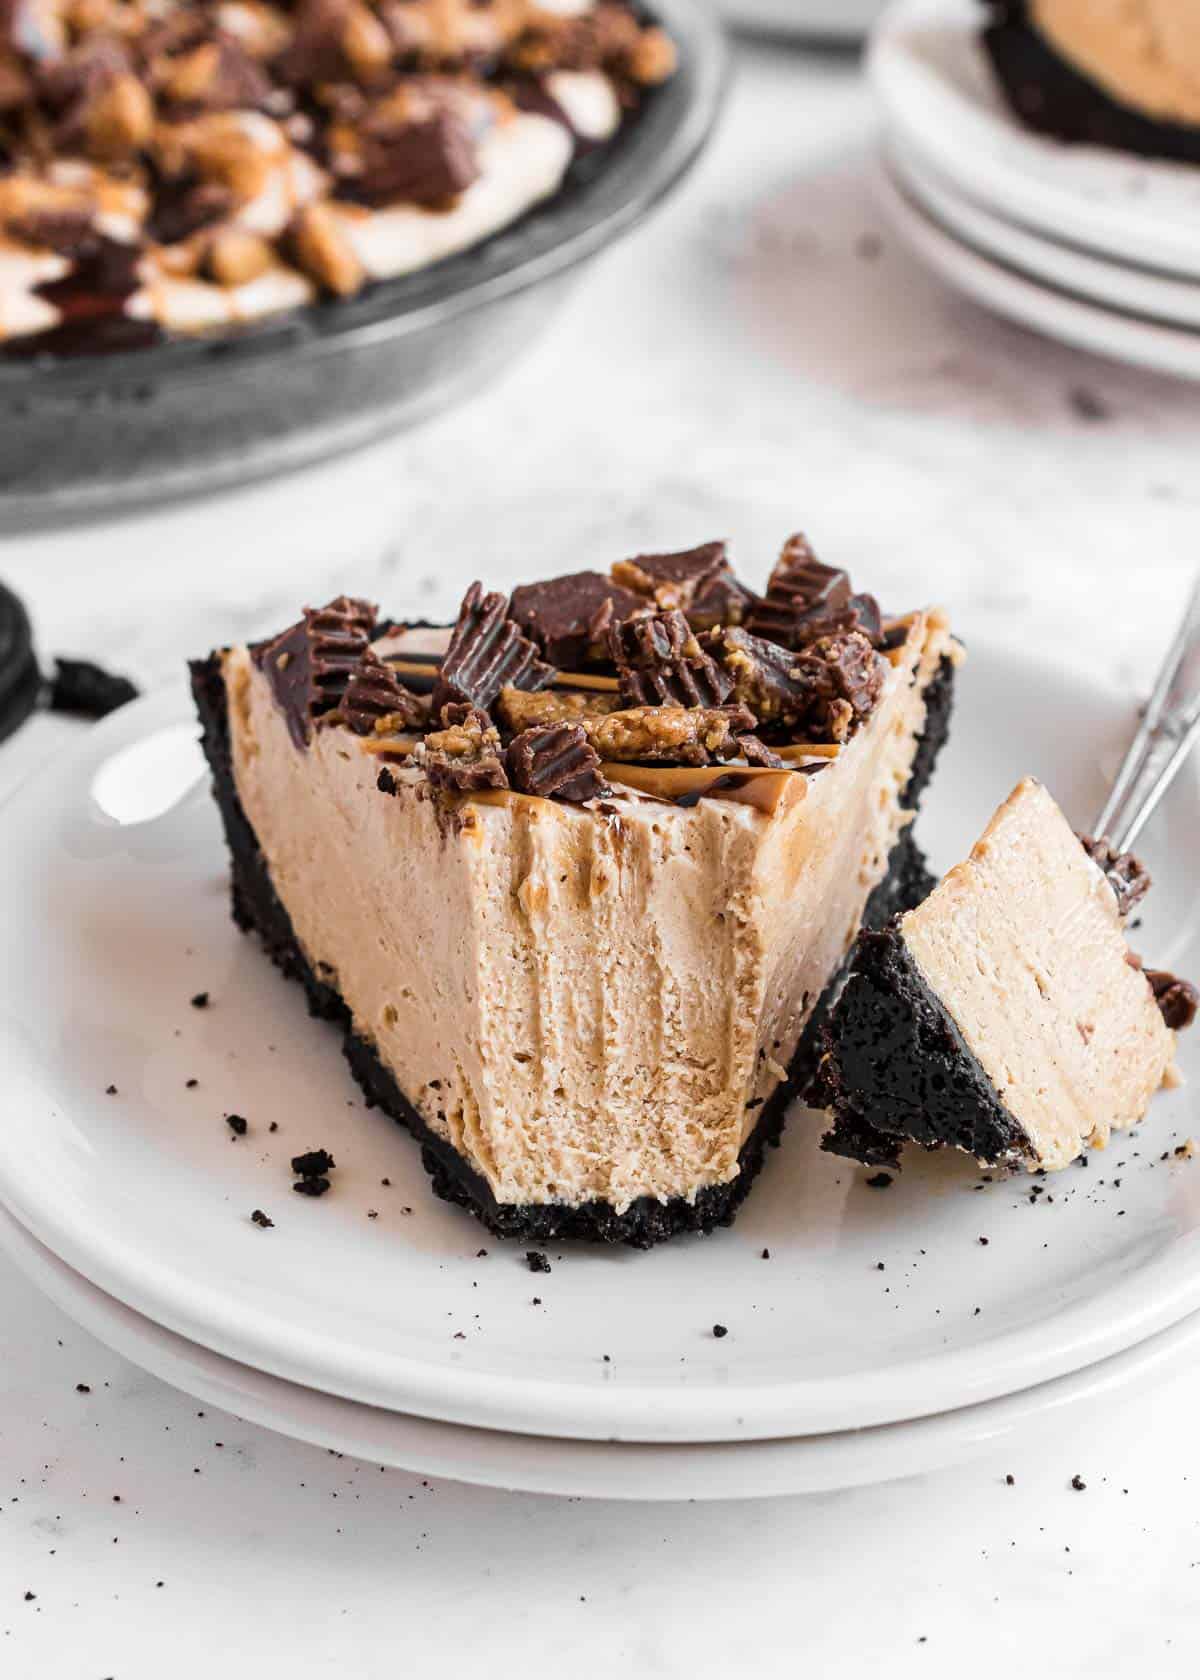 Peanut butter pie with Oreo crust on white plate.